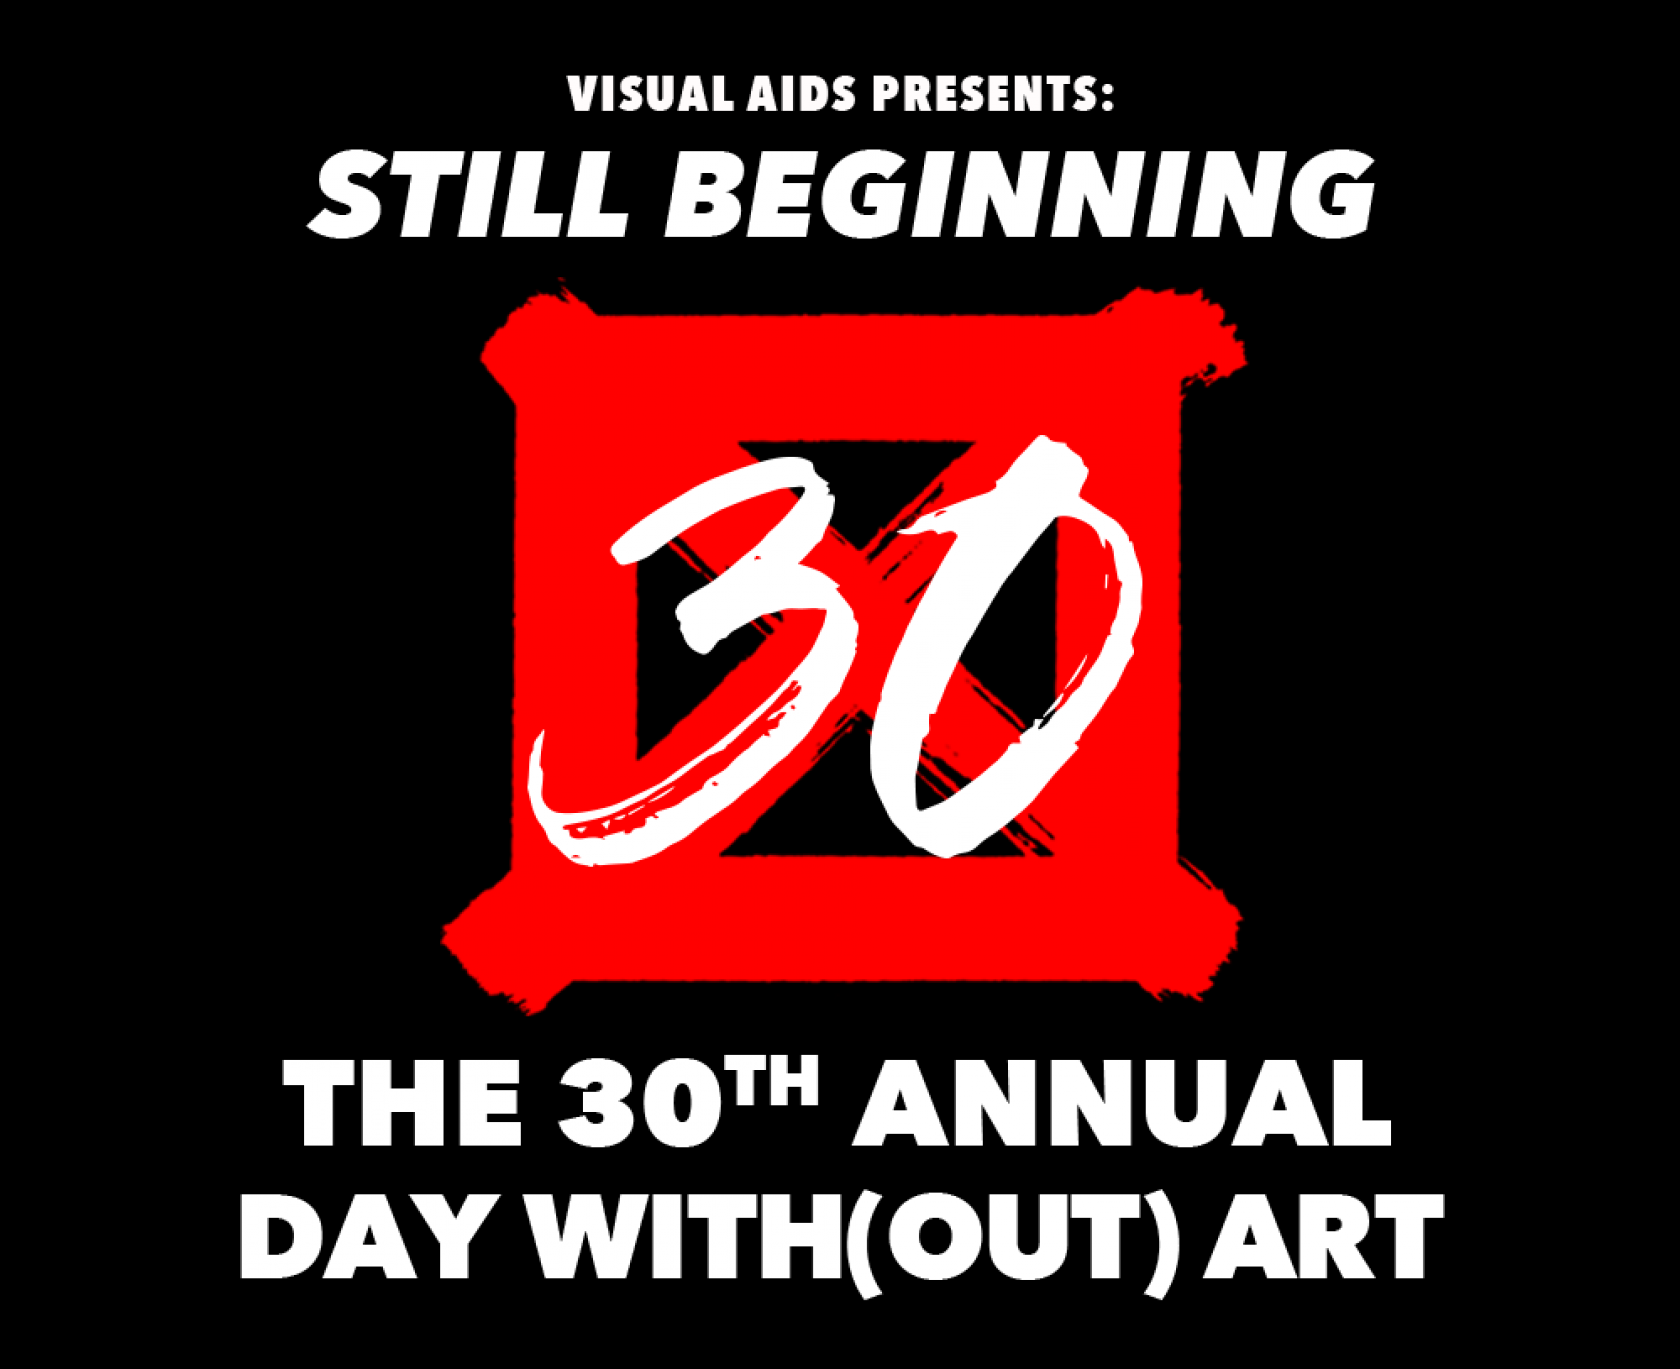 STILL BEGINNING: The 30th Annual Day With(out) Art